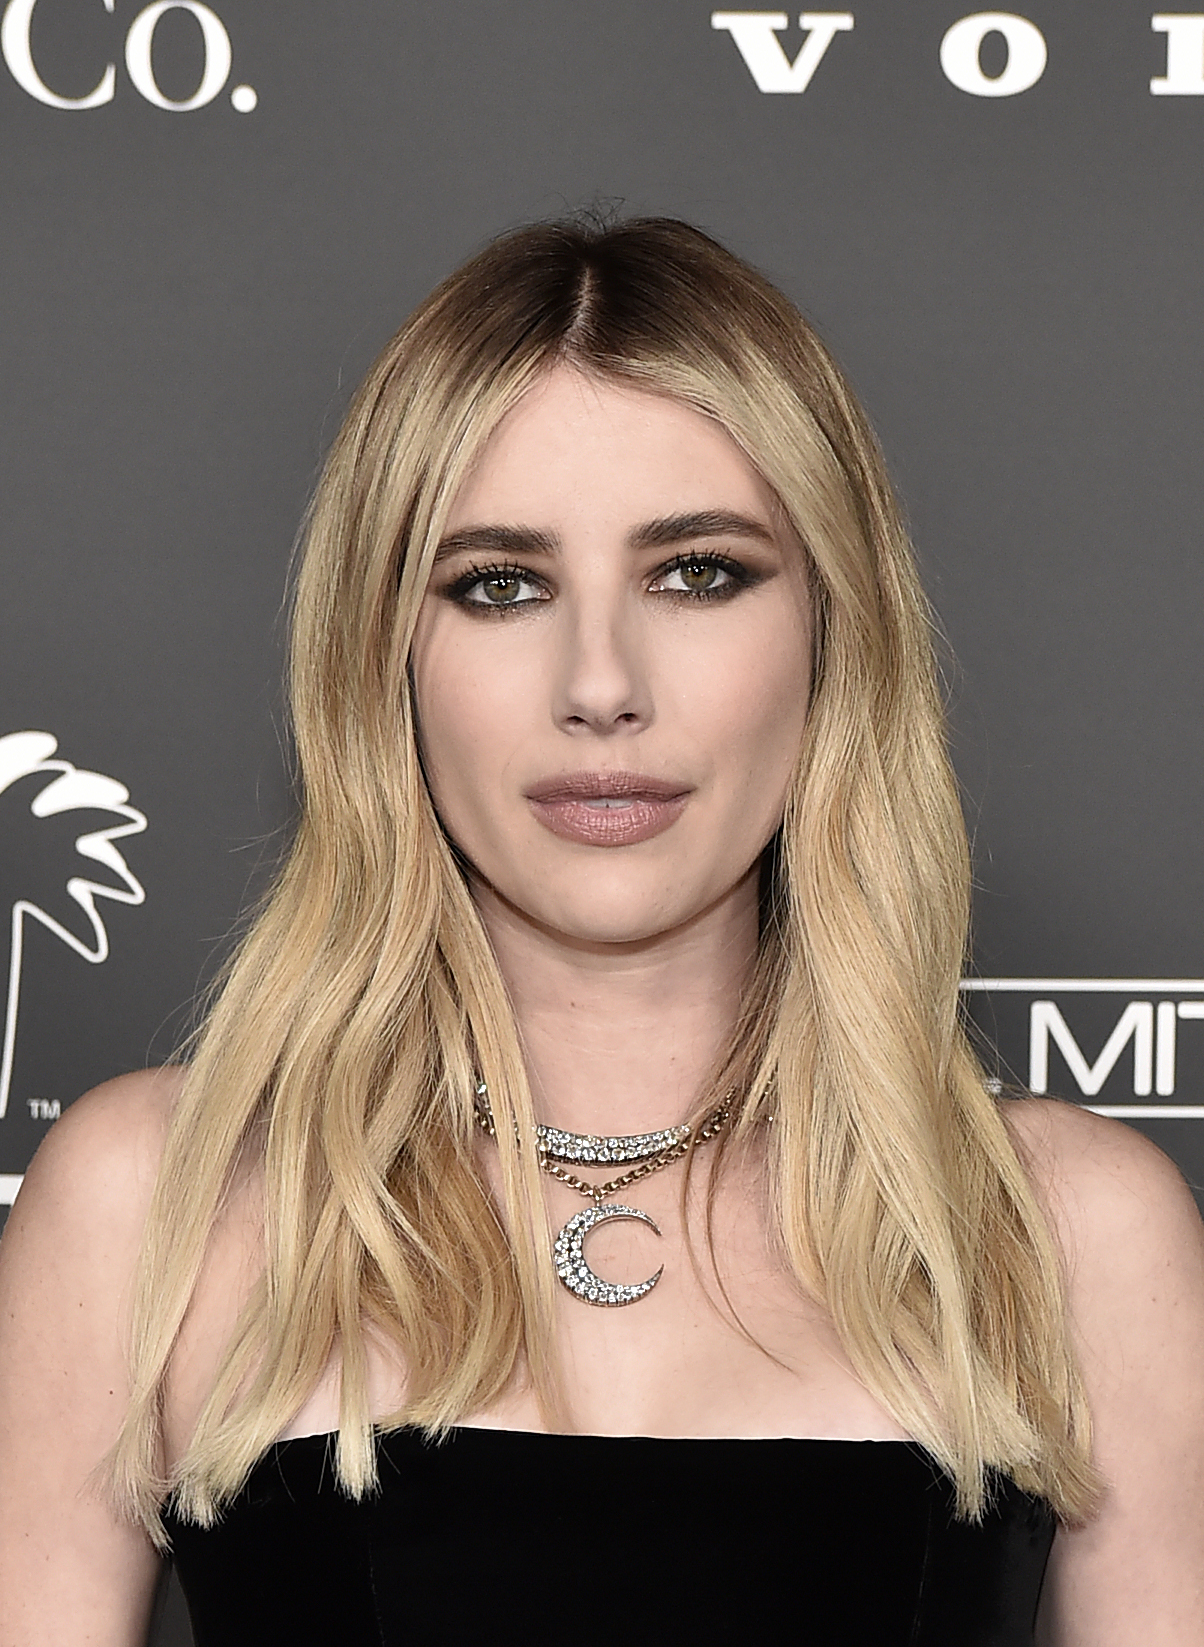 Emma Roberts poses for a photo at a celebrity event, wearing a strapless black dress and layered necklaces against a media backdrop